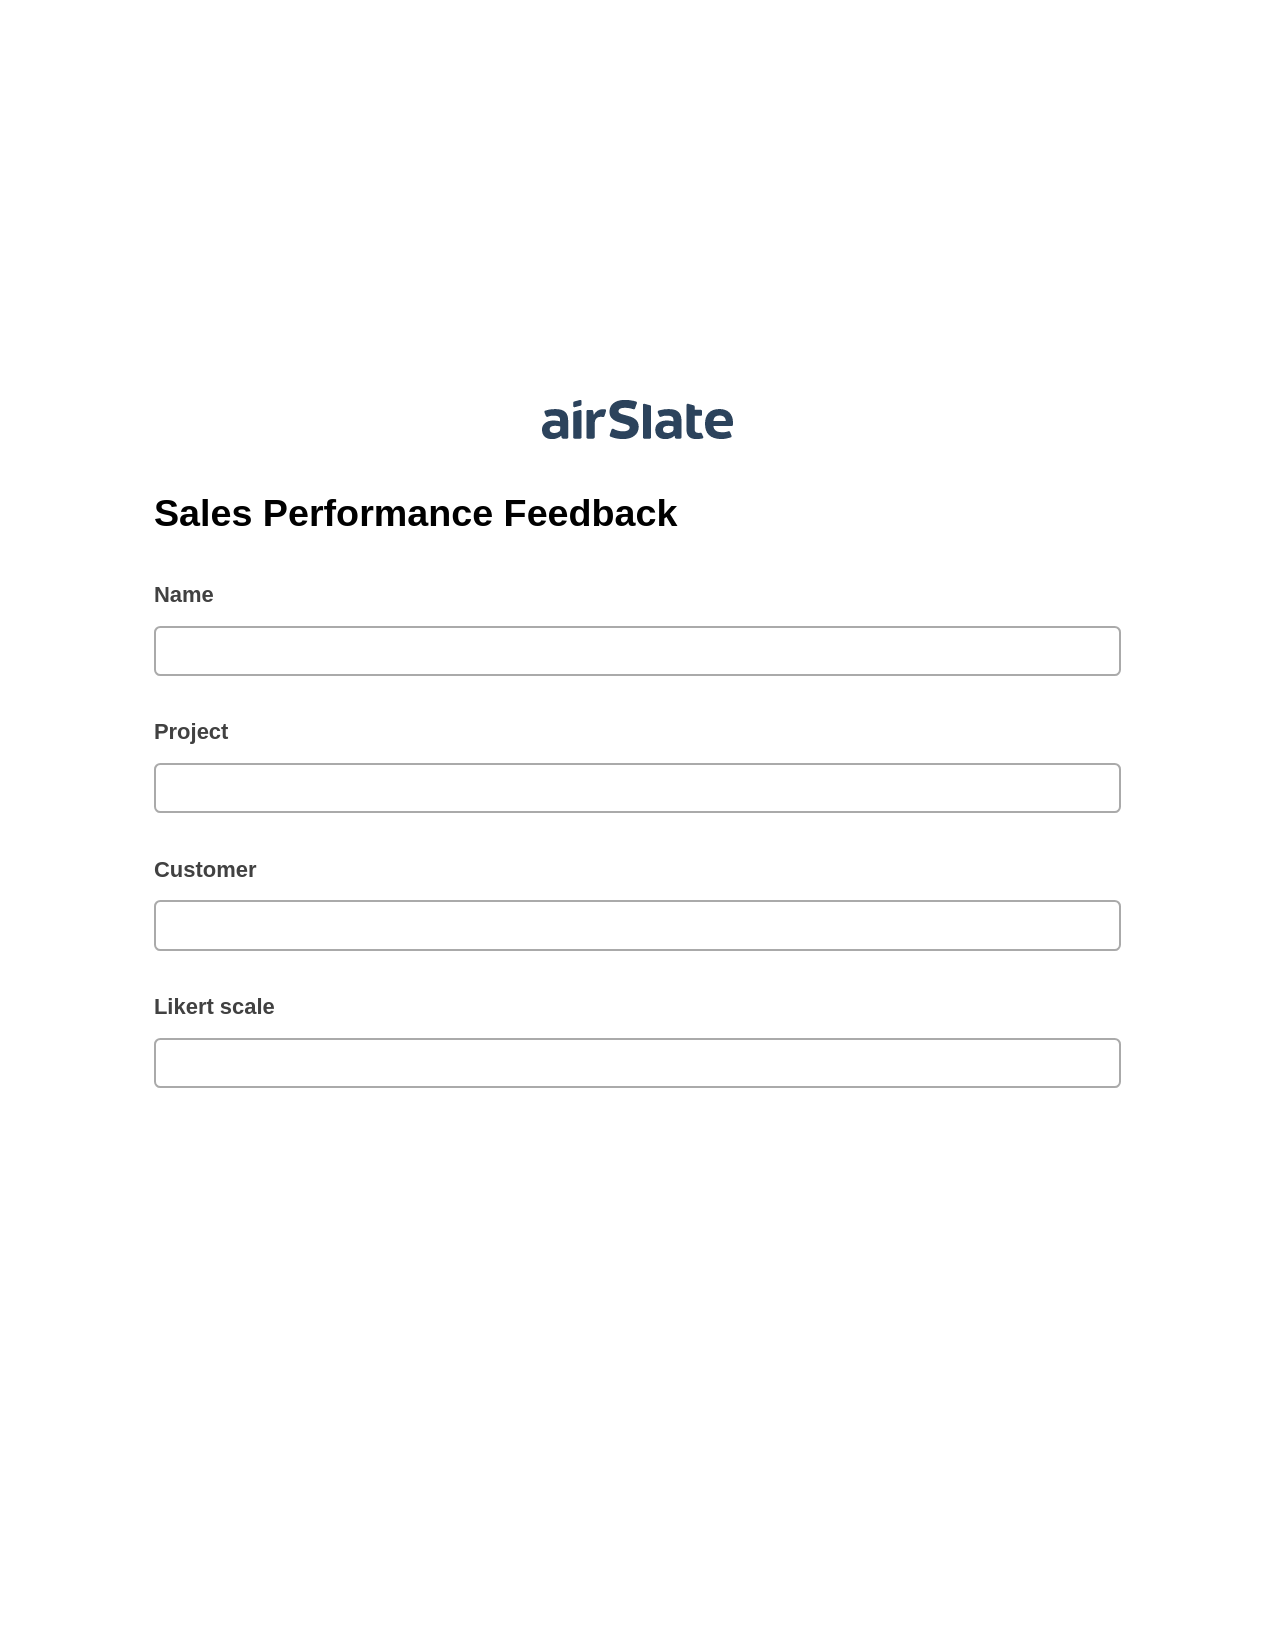 Sales Performance Feedback Pre-fill from CSV File Bot, Lock the slate bot, Export to Formstack Documents Bot